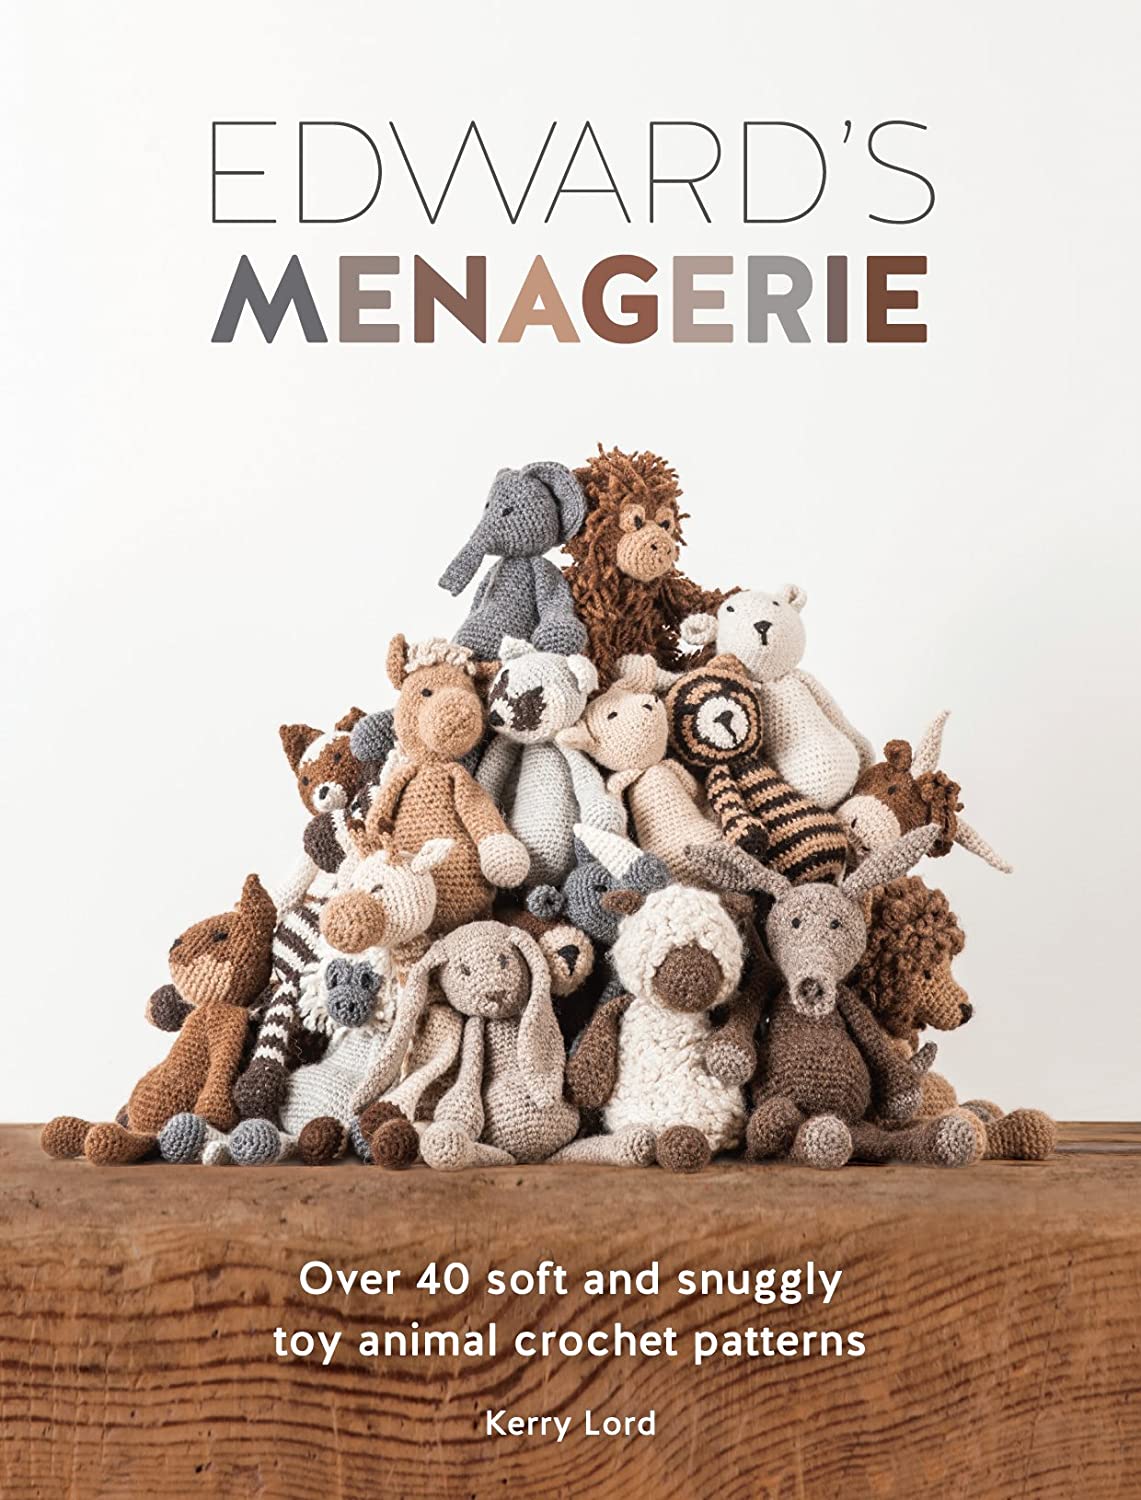 Edward Menagerie: Over 40 Soft and Snuggly Toy Animal Crochet Patterns